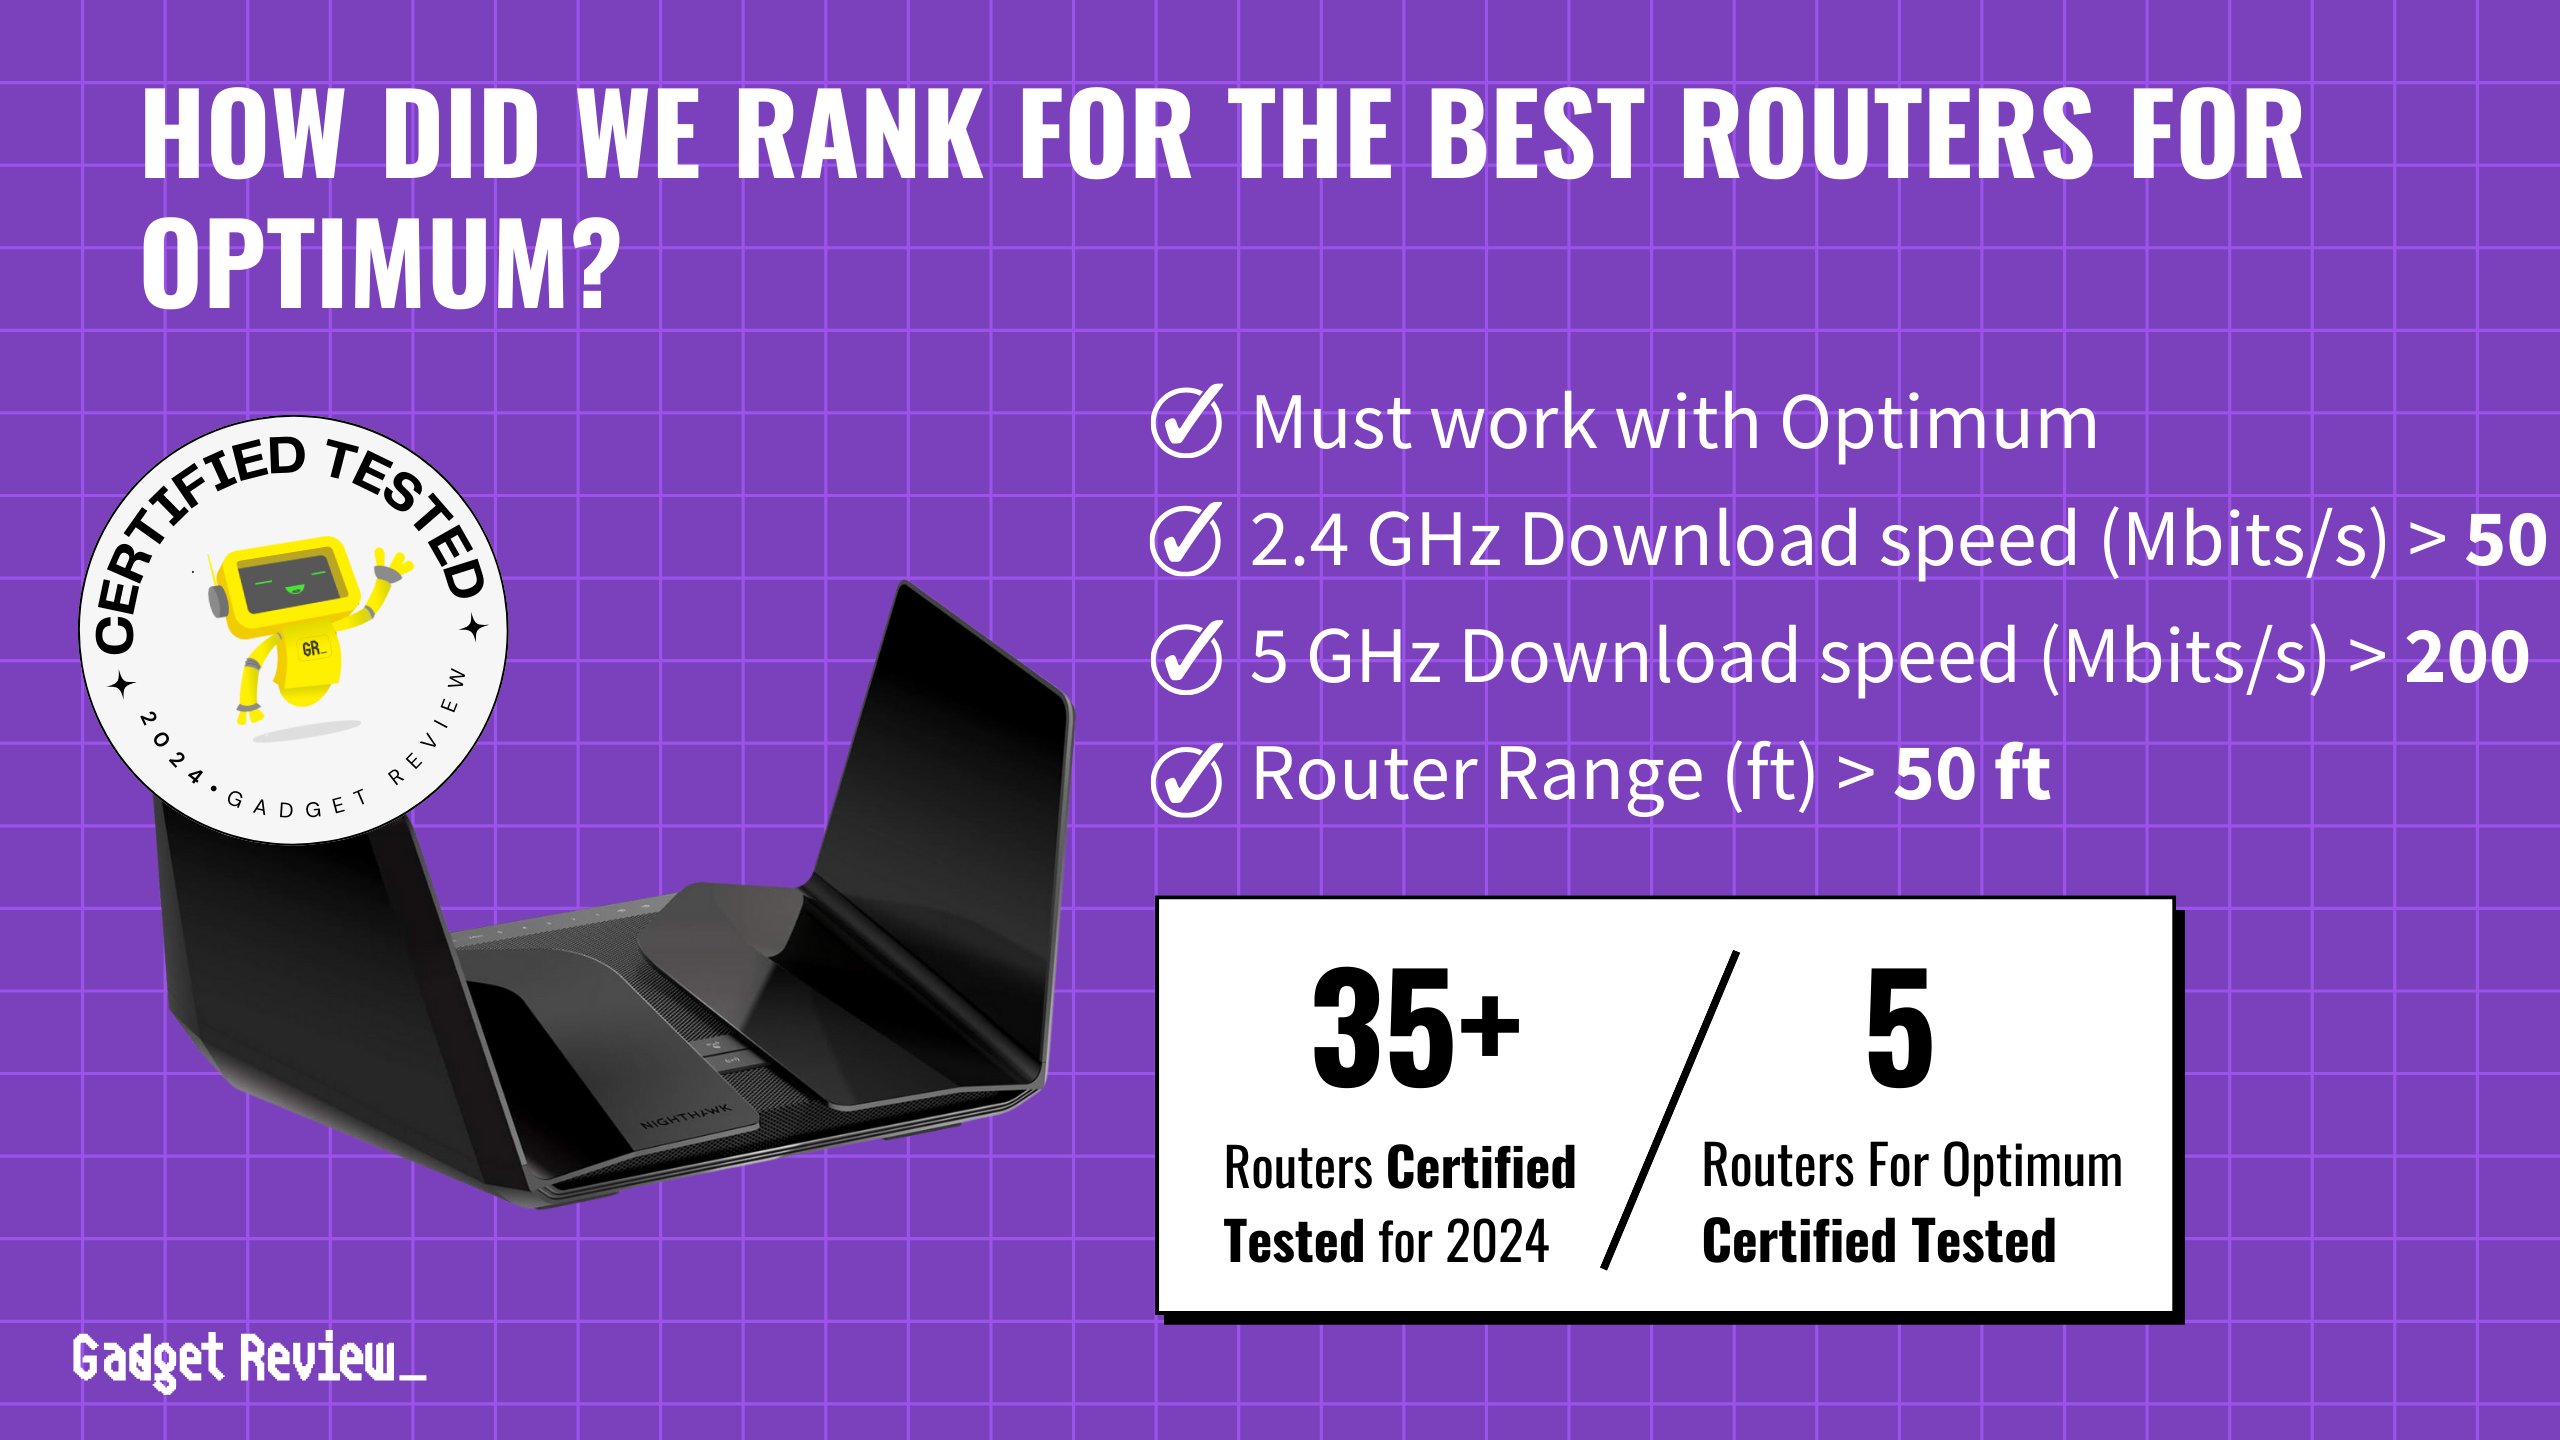 We Ranked the 5 Best Routers for Optimum